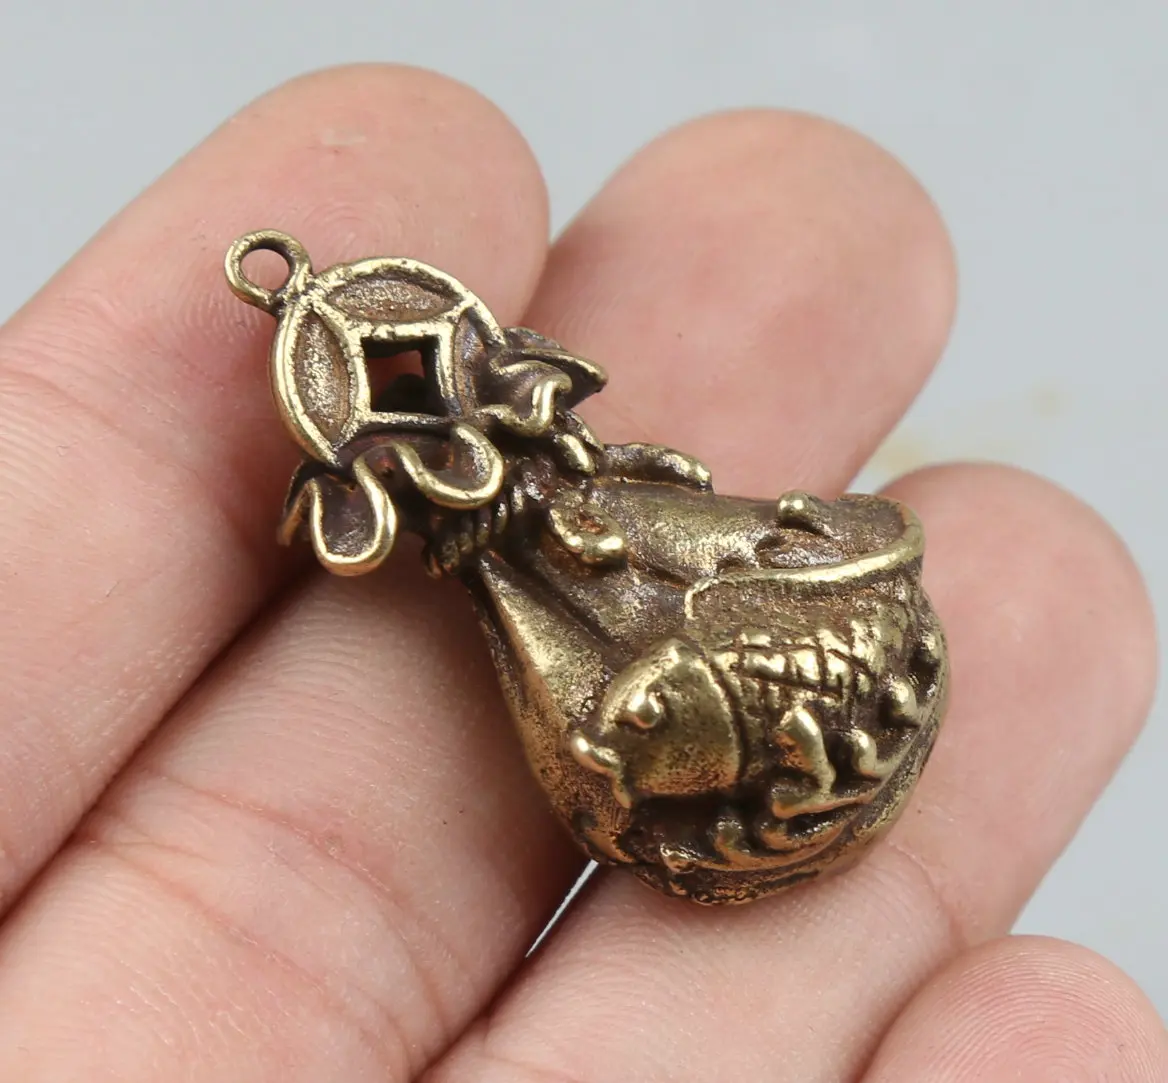 

38MM/1.5"Collect Curio Rare China Fengshui Small Bronze Exquisite Animal Fish Money Bag Purse Wealth Pendant Statue Statuary 26g